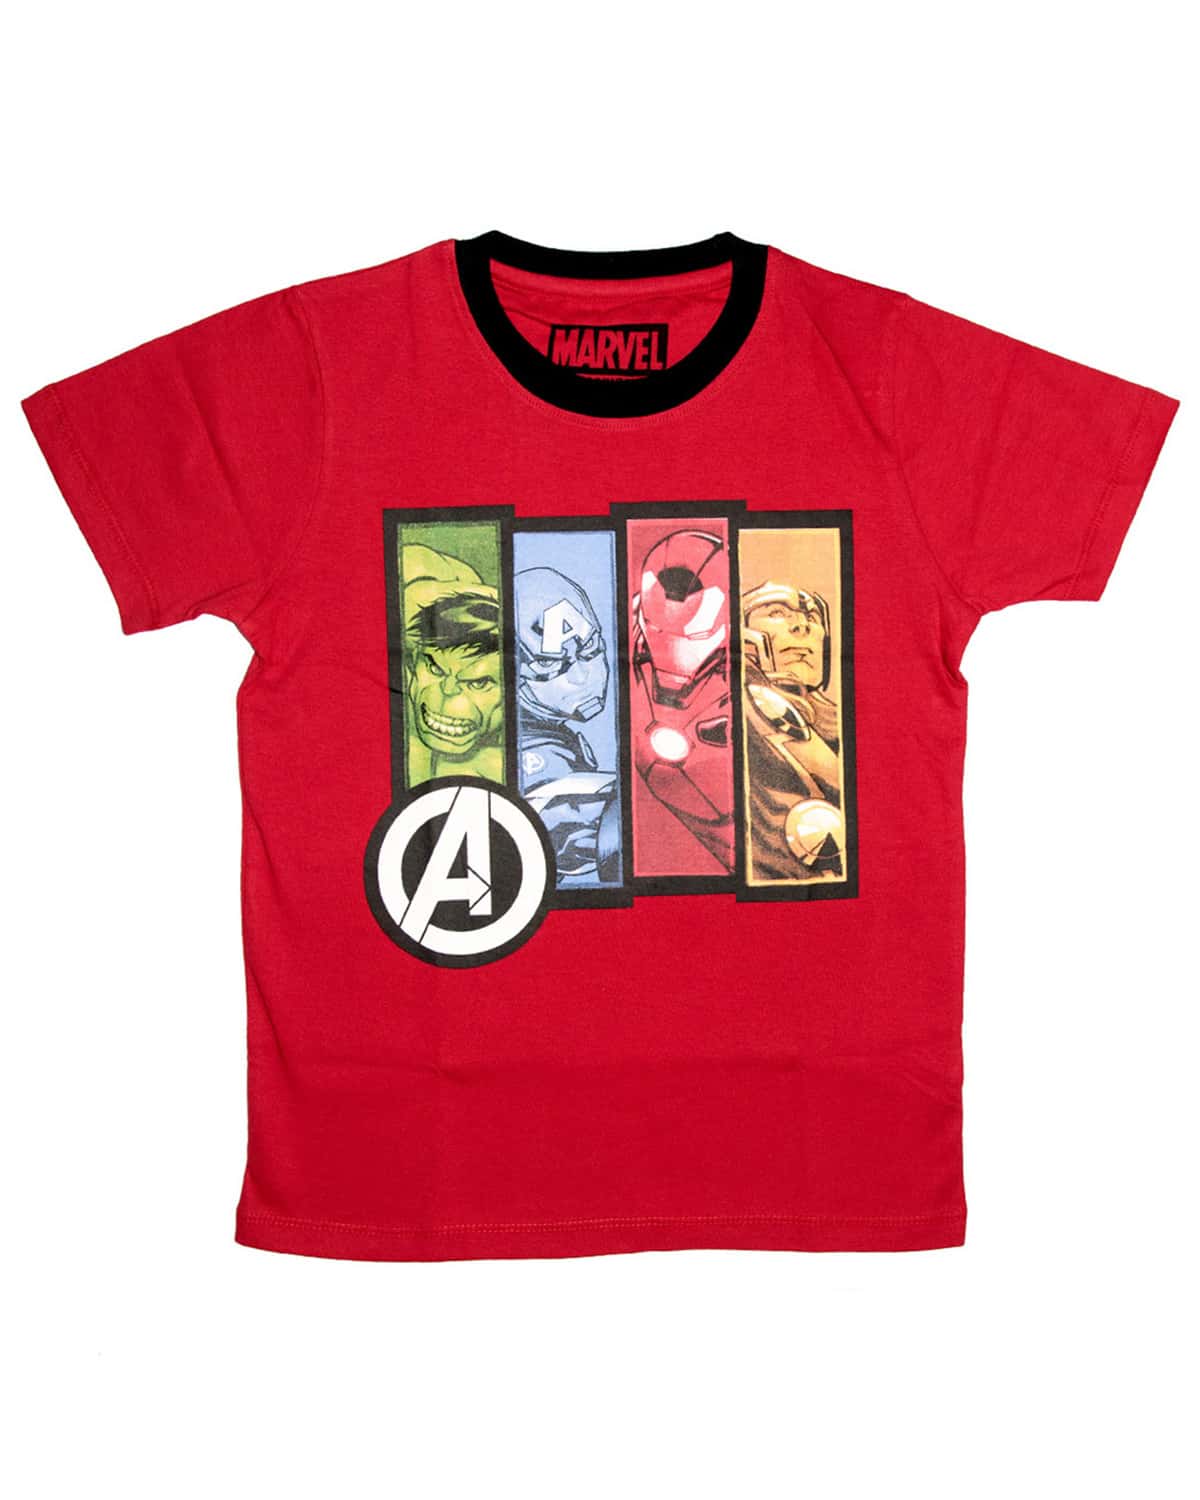 Details about   The Children Place X Marvel Avengers Logo Kids T Shirt Glows in the dark 